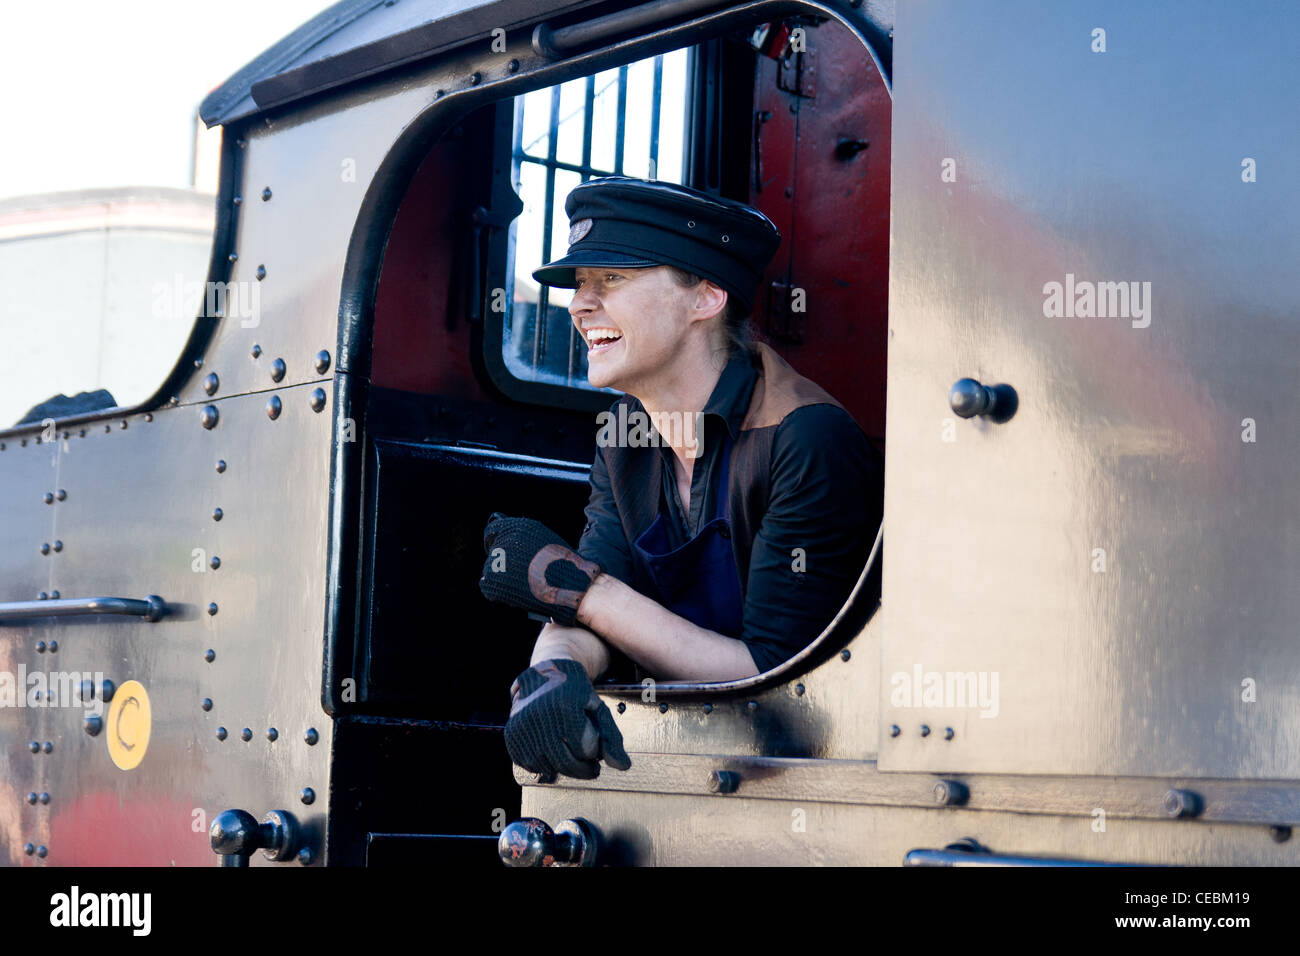 Steam locomotive pulling a train on the Llangollen Railway with the female engine driver laughing Stock Photo